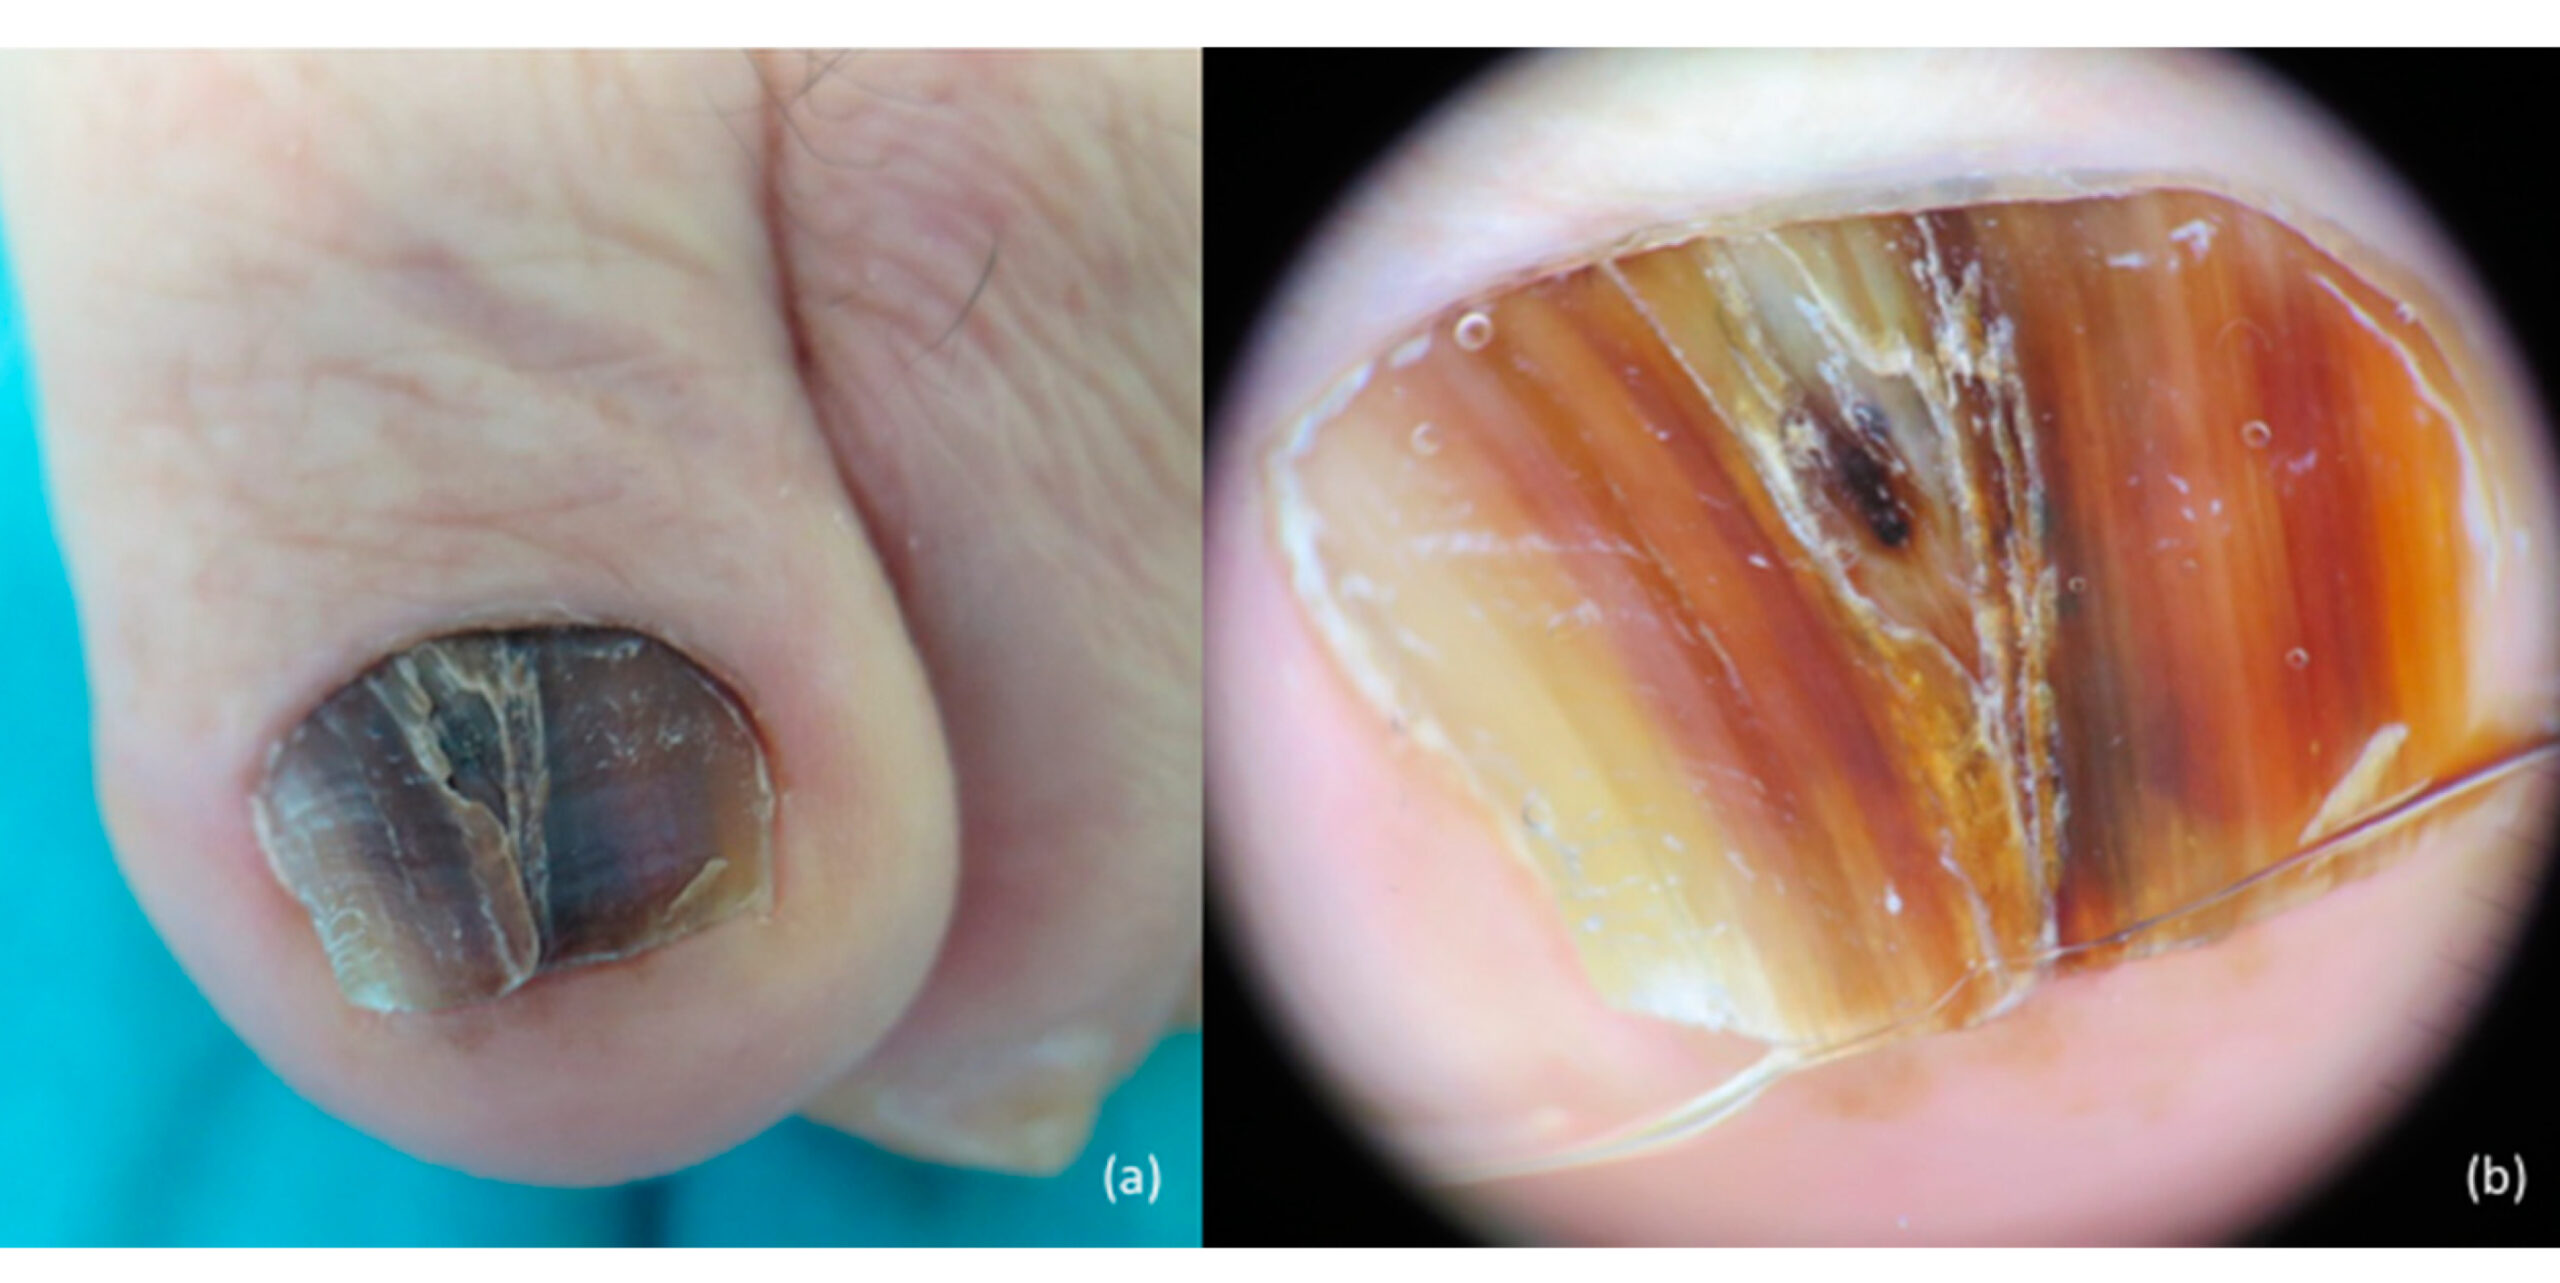 what does melanoma look like under the toenail | Symptoms and pictures